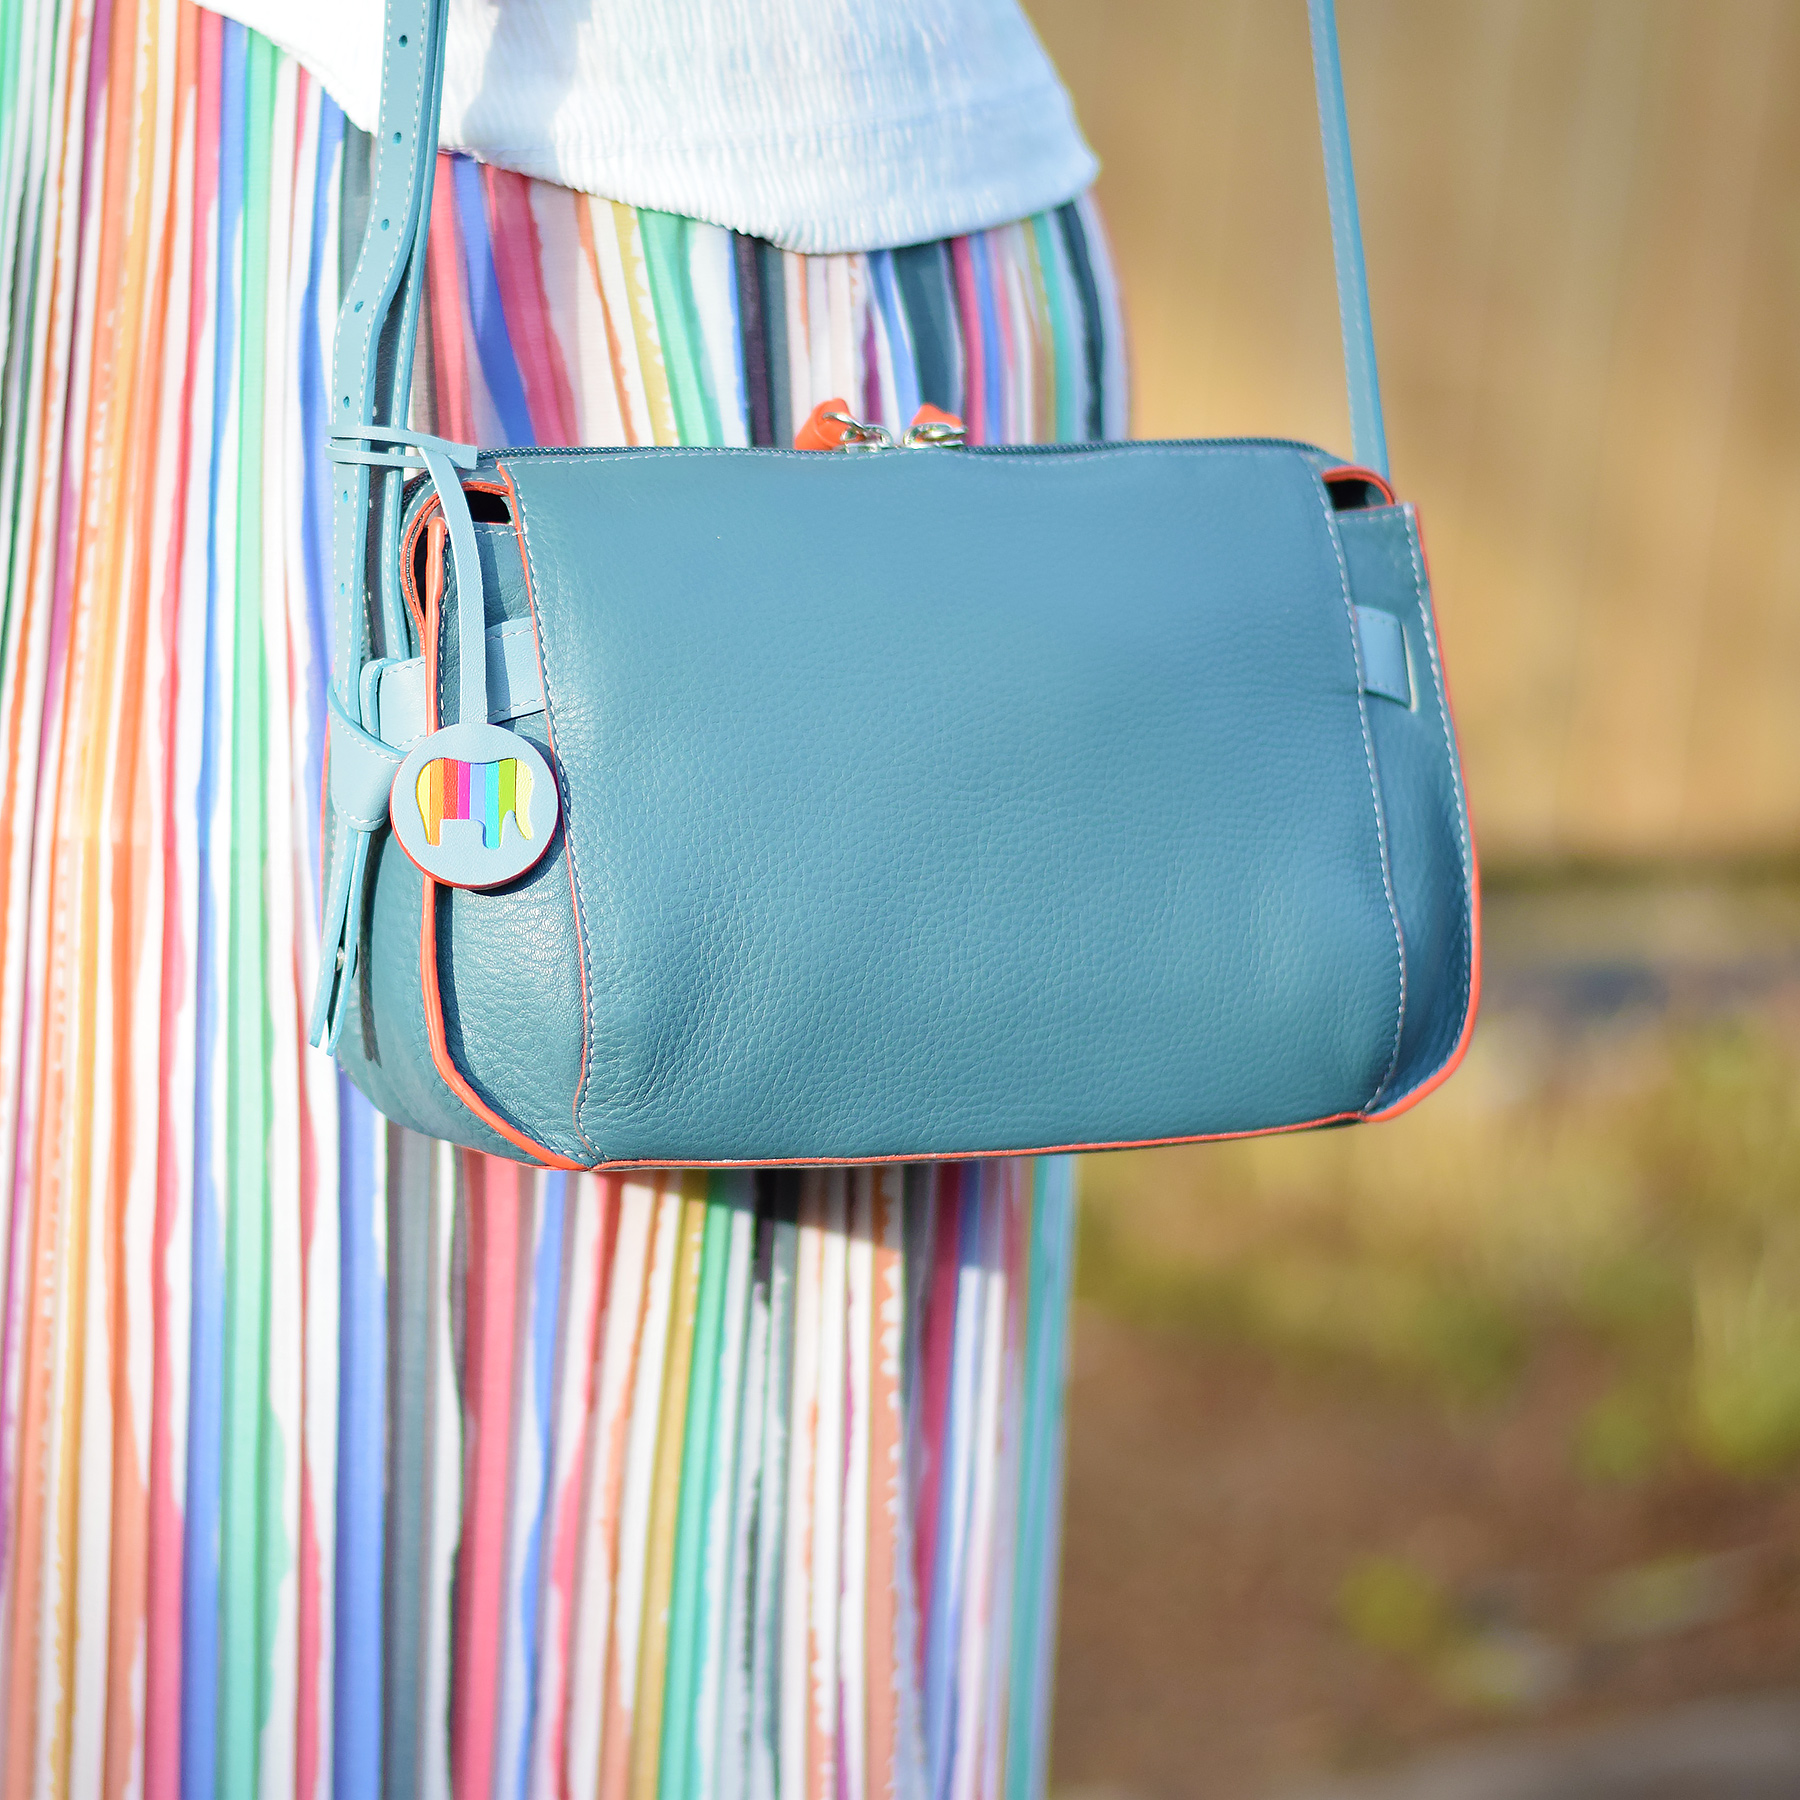 Outfit ideas for styling a light blue bag